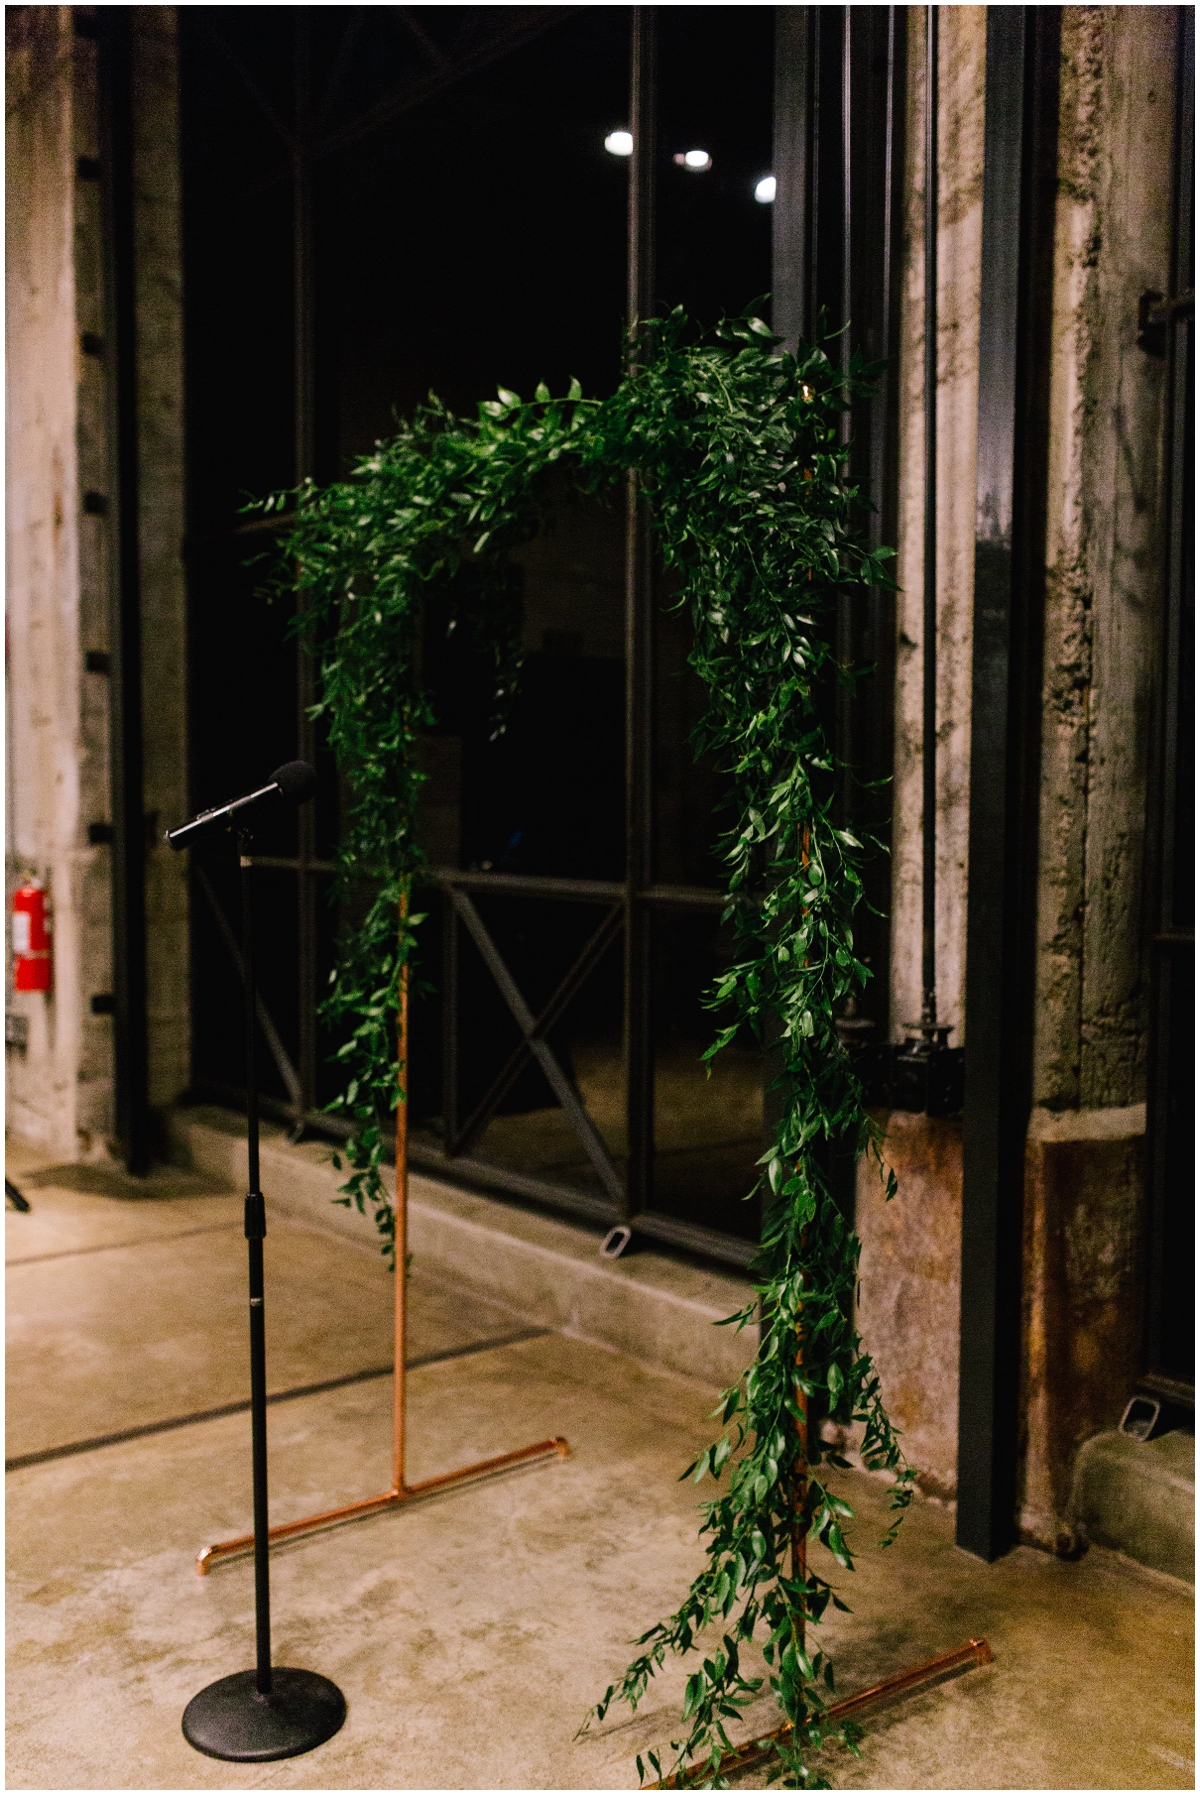  Garland draped ceremony arch, Mill City Museum wedding planned by MN Wedding Planner, Rosetree Weddings &amp; Events  